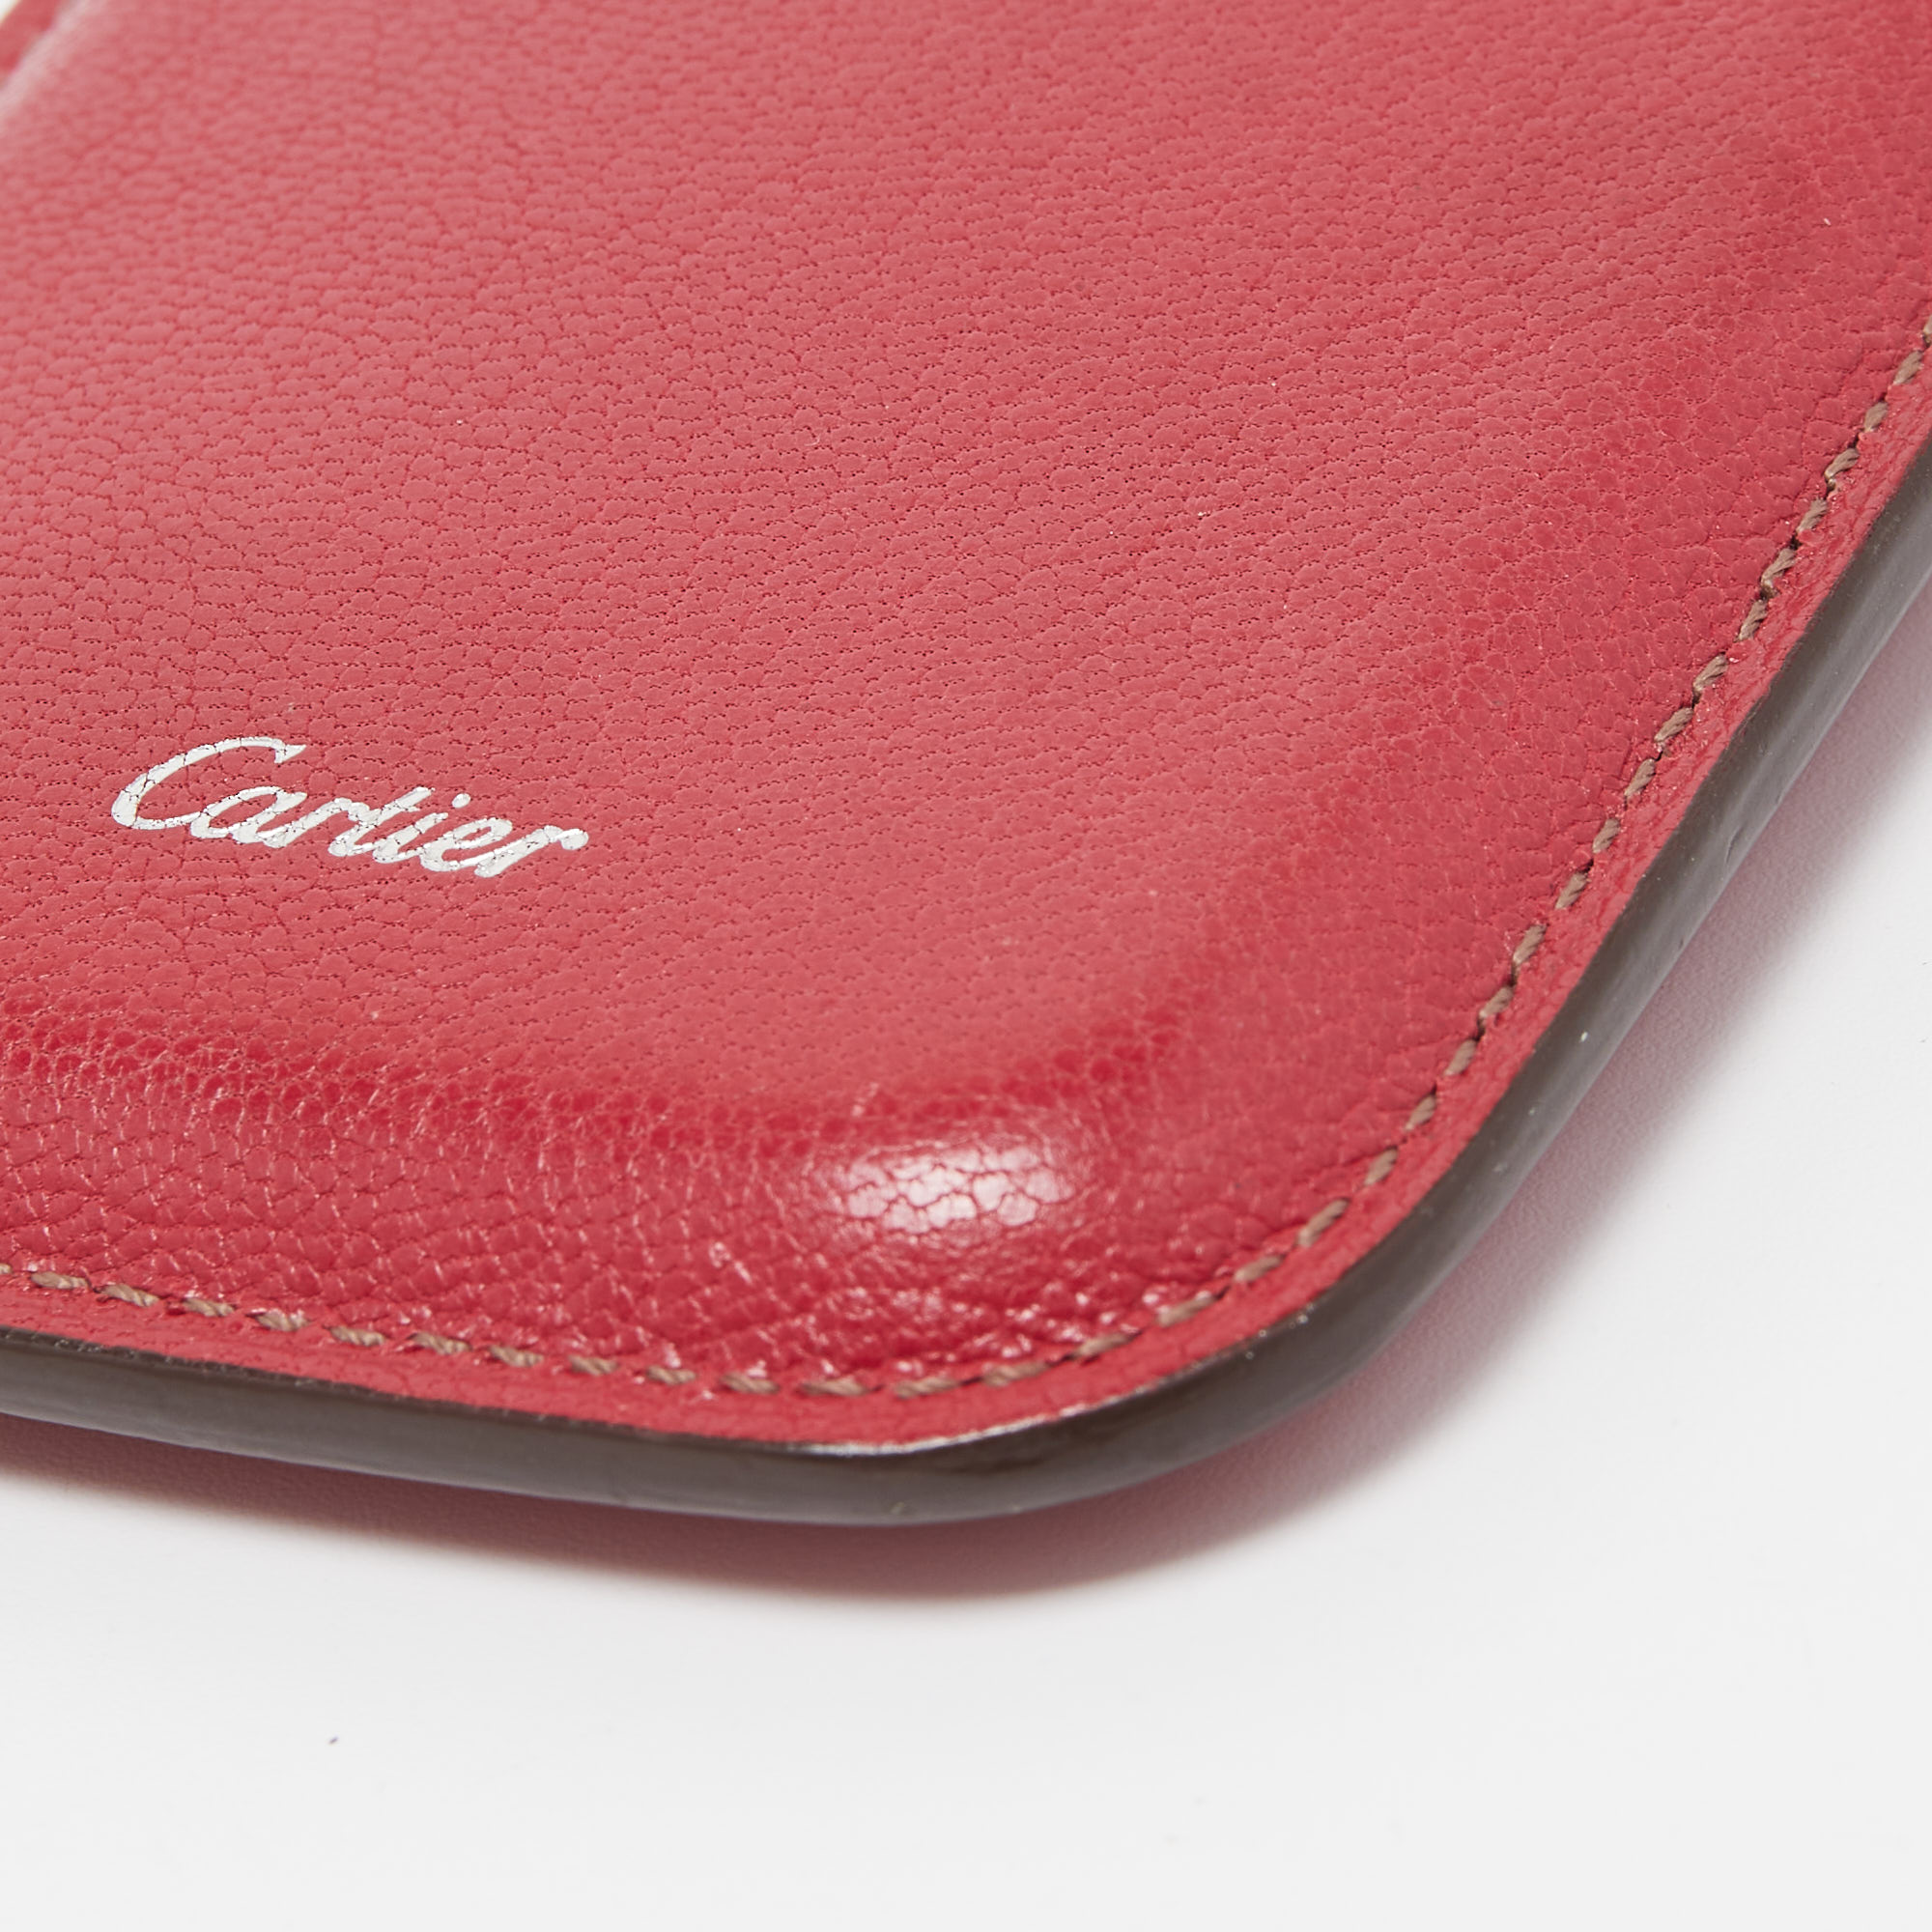 Cartier Pink Leather IPhone Case